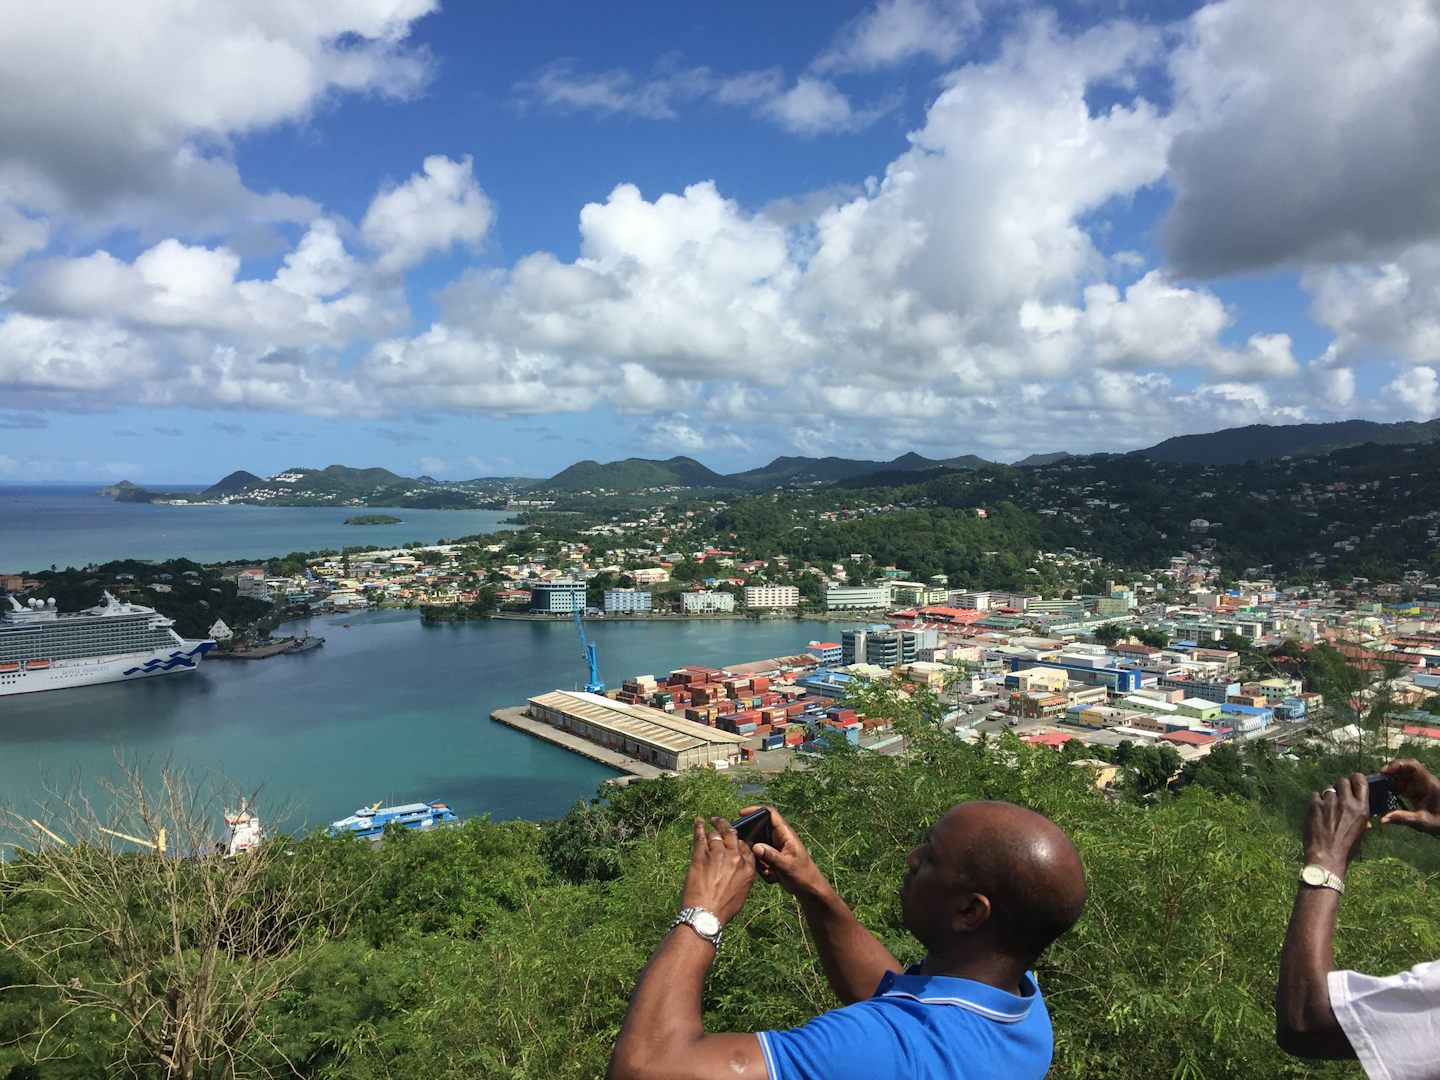 Royal Princess docked in a scenic harbor in St. Lucia